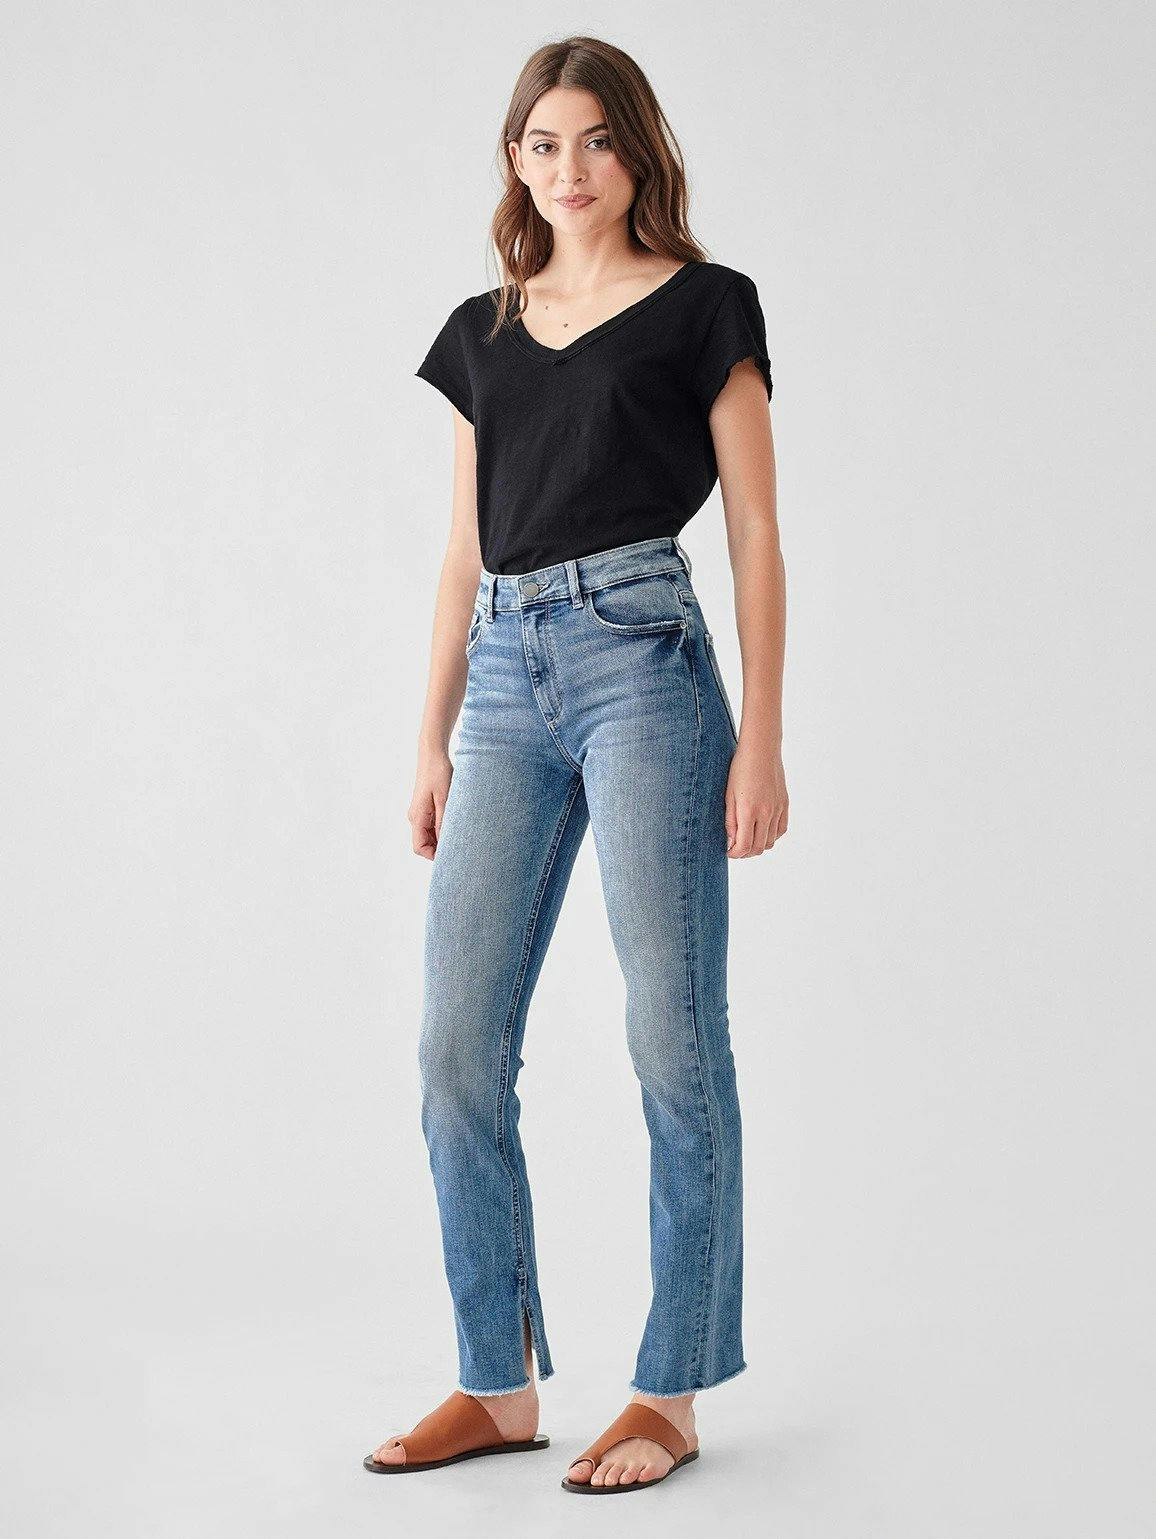 The best eco-friendly jeans and denim brands